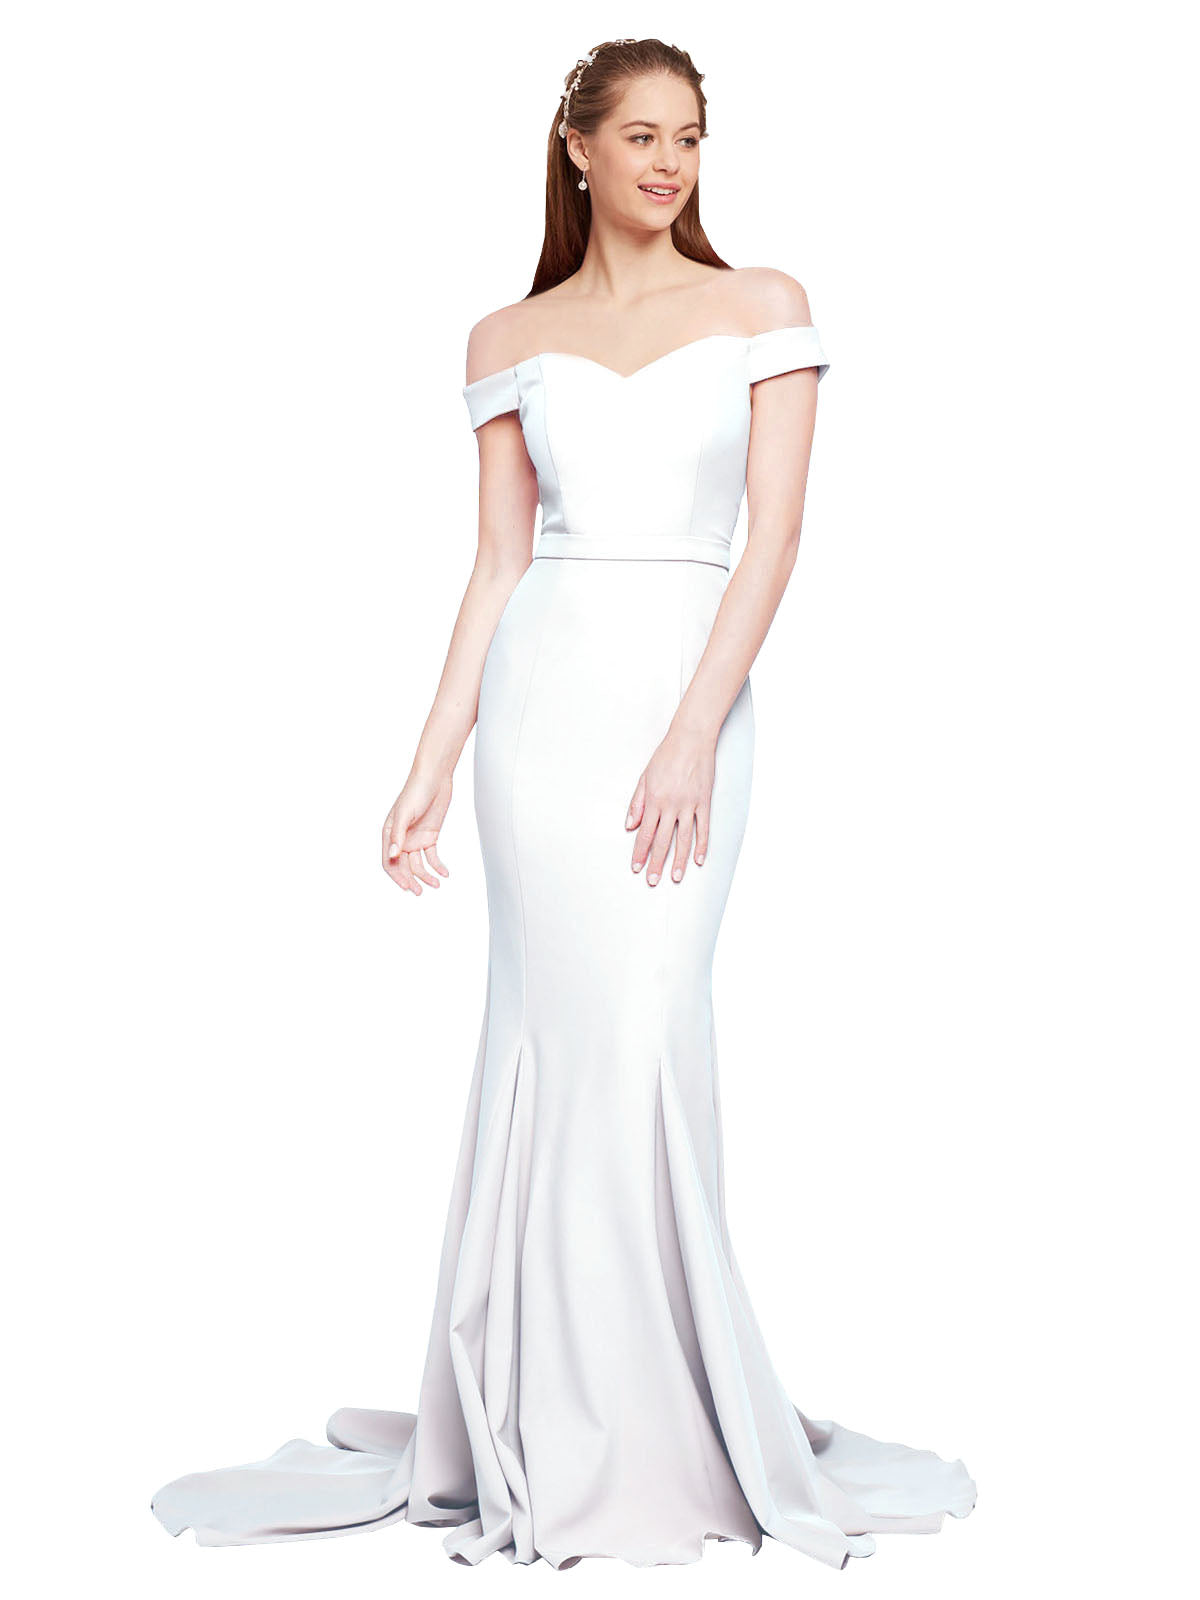 RightBrides Jannet Long Mermaid Off the Shoulder Sweetheart Sweep Train Floor Length Sleeveless White Stretch Crepe Bridesmaid Dress